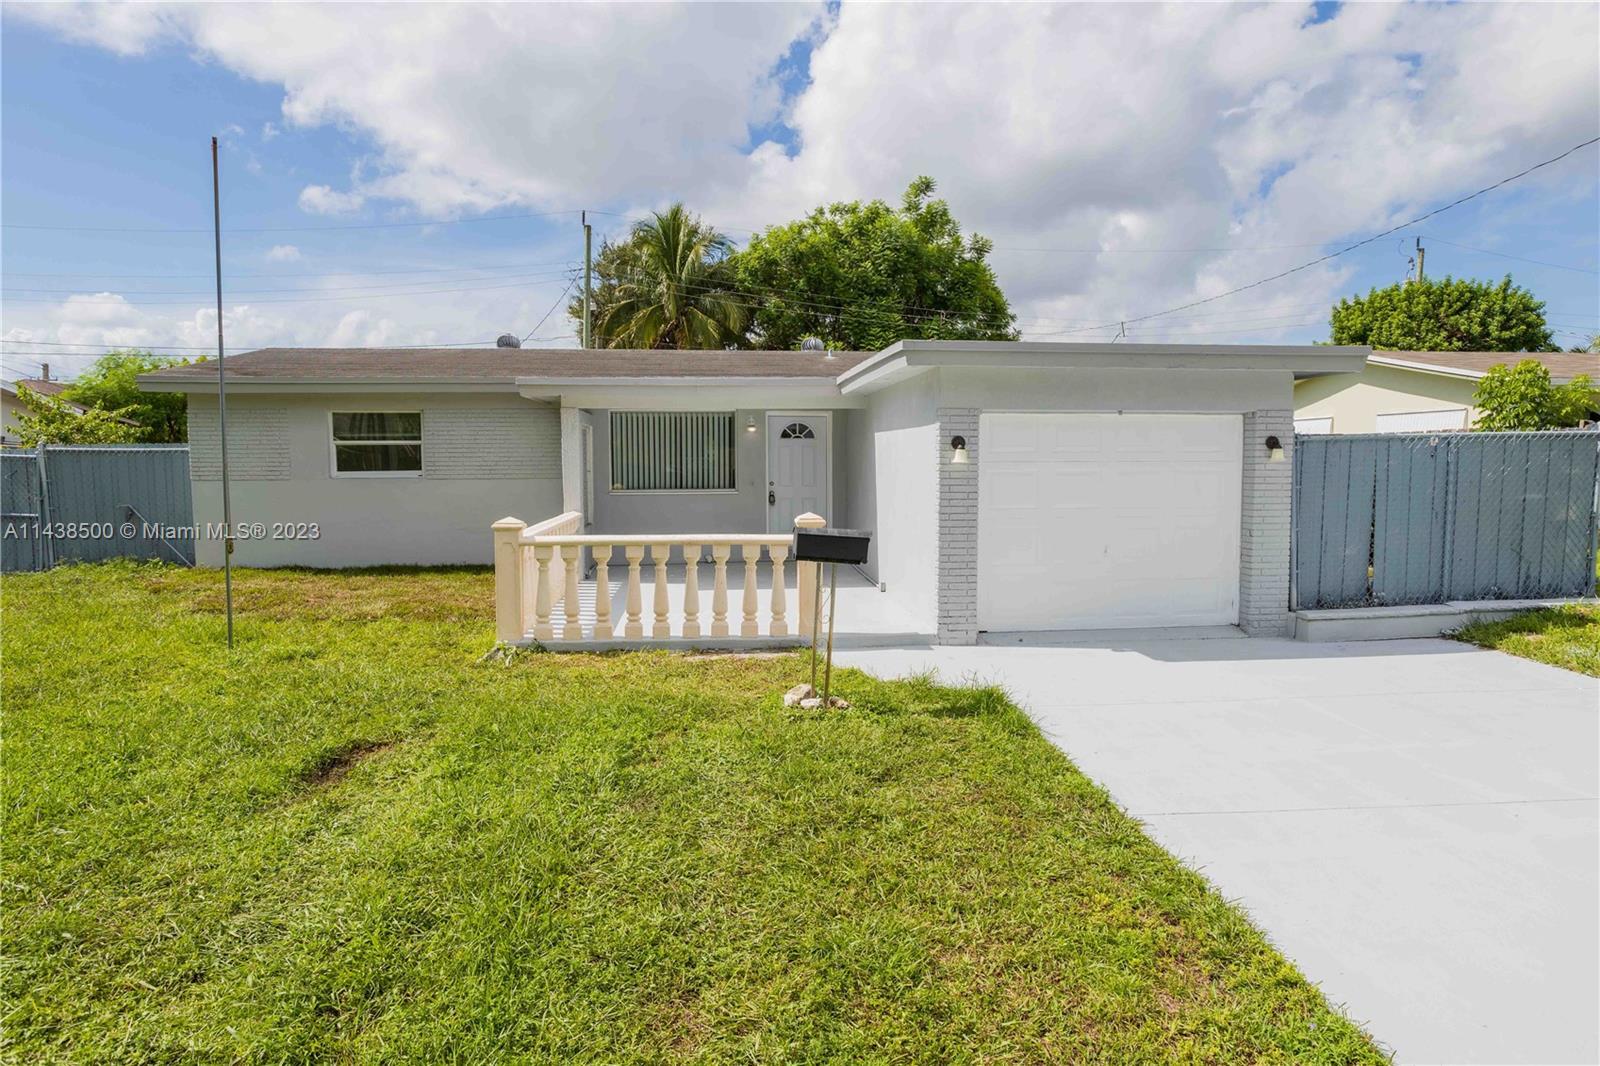 Remodeled 3 bed, 2 bath home is a stunning gem located in the prestigious community of Hollywood Hil